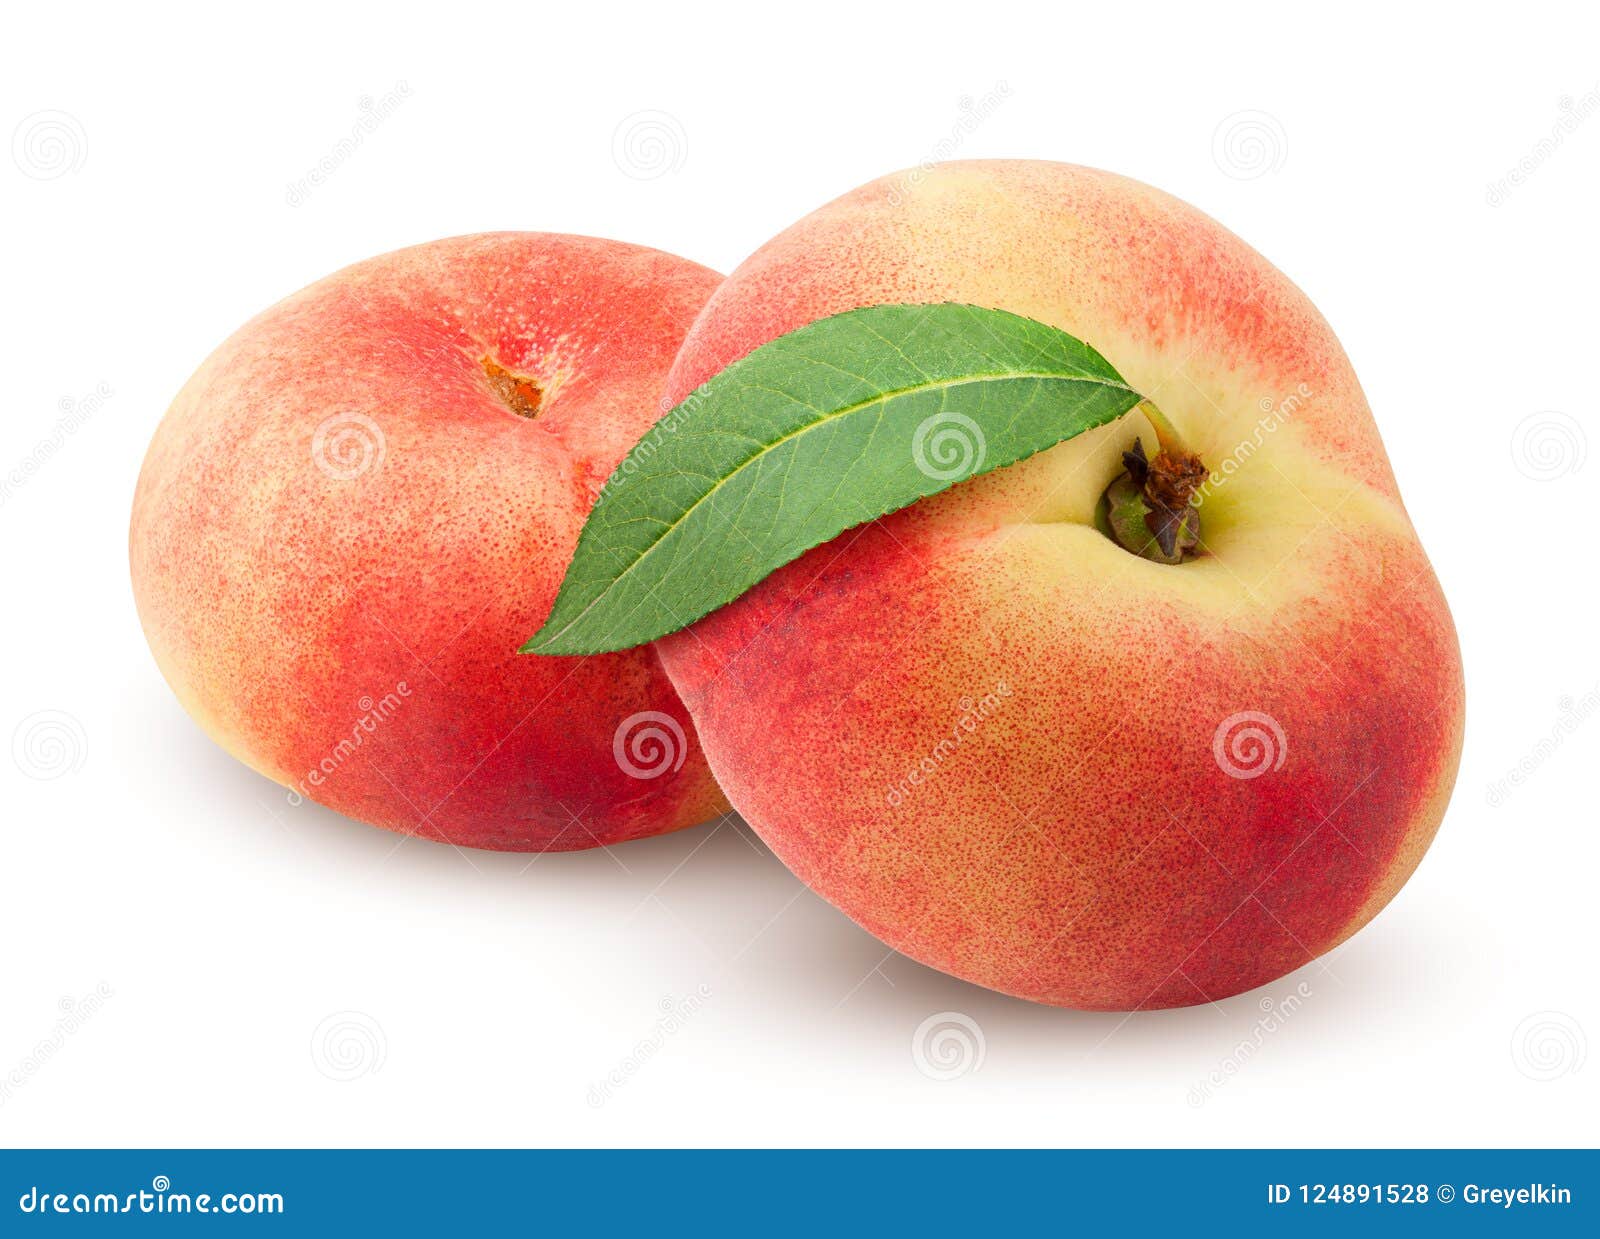 flat peach  on white background, clipping path, full depth of field